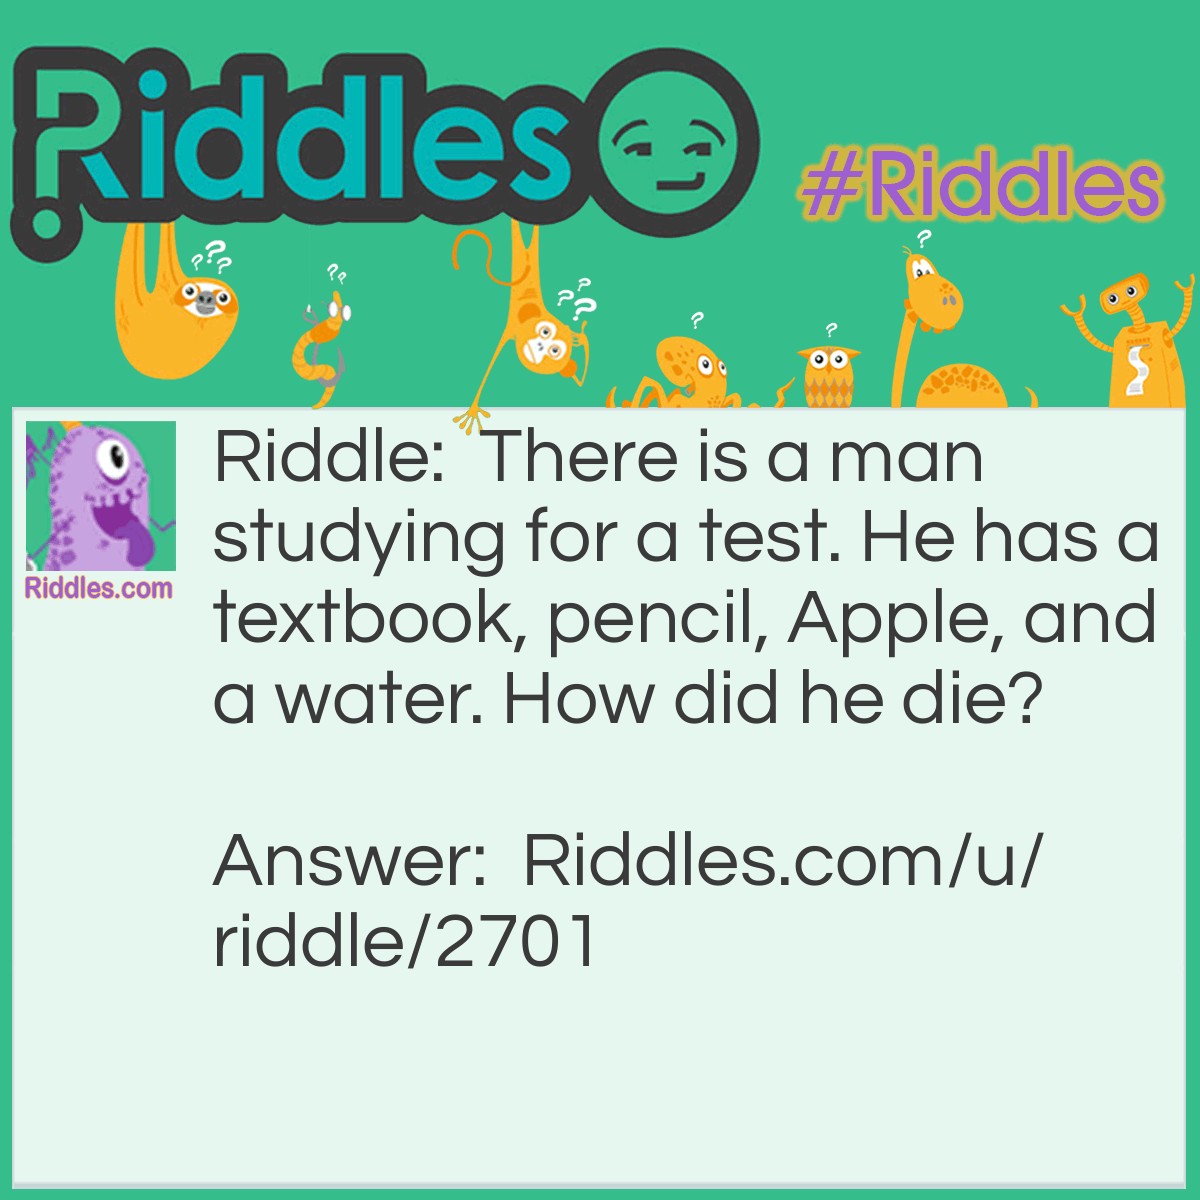 Riddle: There is a man studying for a test. He has a textbook, pencil, Apple, and a water. How did he die? Answer: He spilled water on the apple and he was electrocuted.